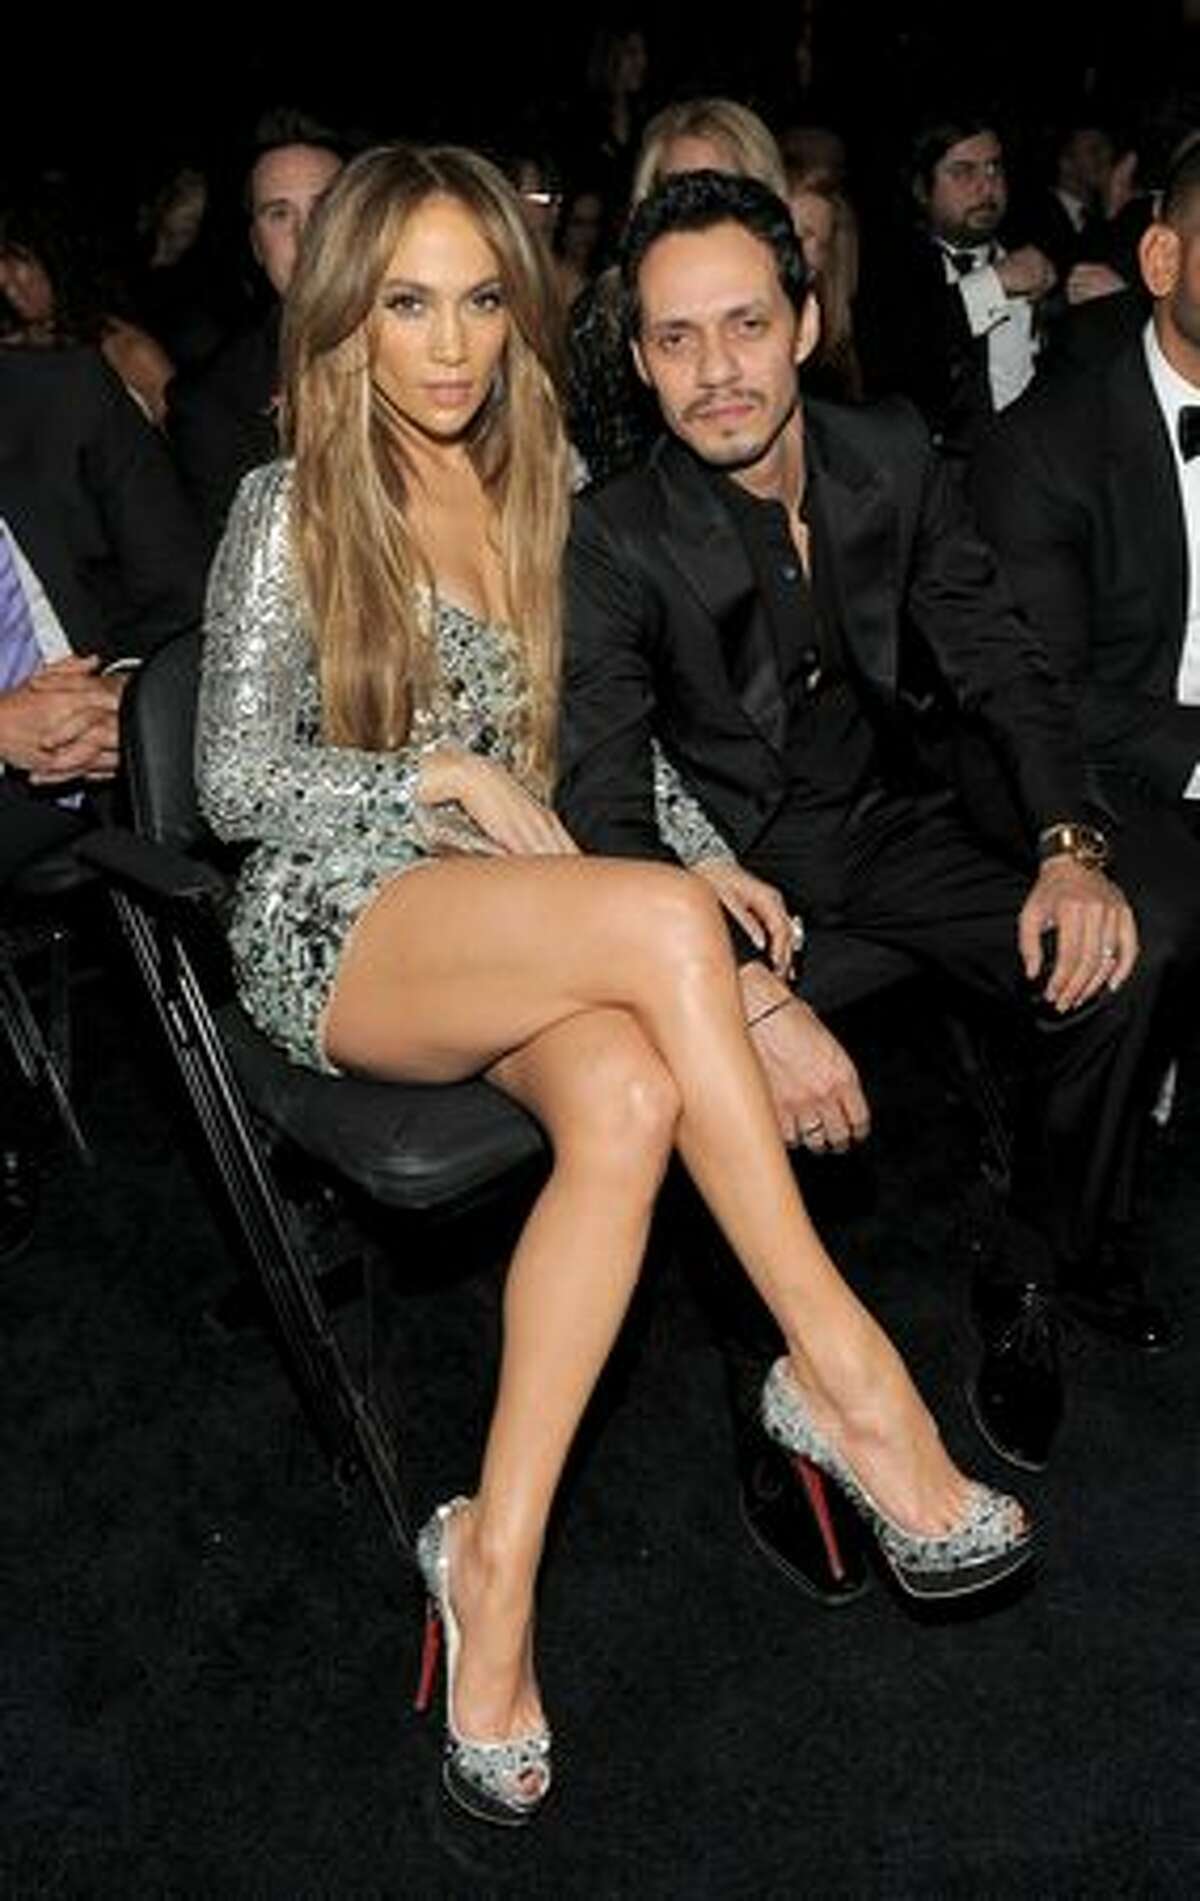 Actress Jennifer Lopez and singer Marc Anthony attend The 53rd Annual GRAMMY Awards held at Staples Center in Los Angeles, California.